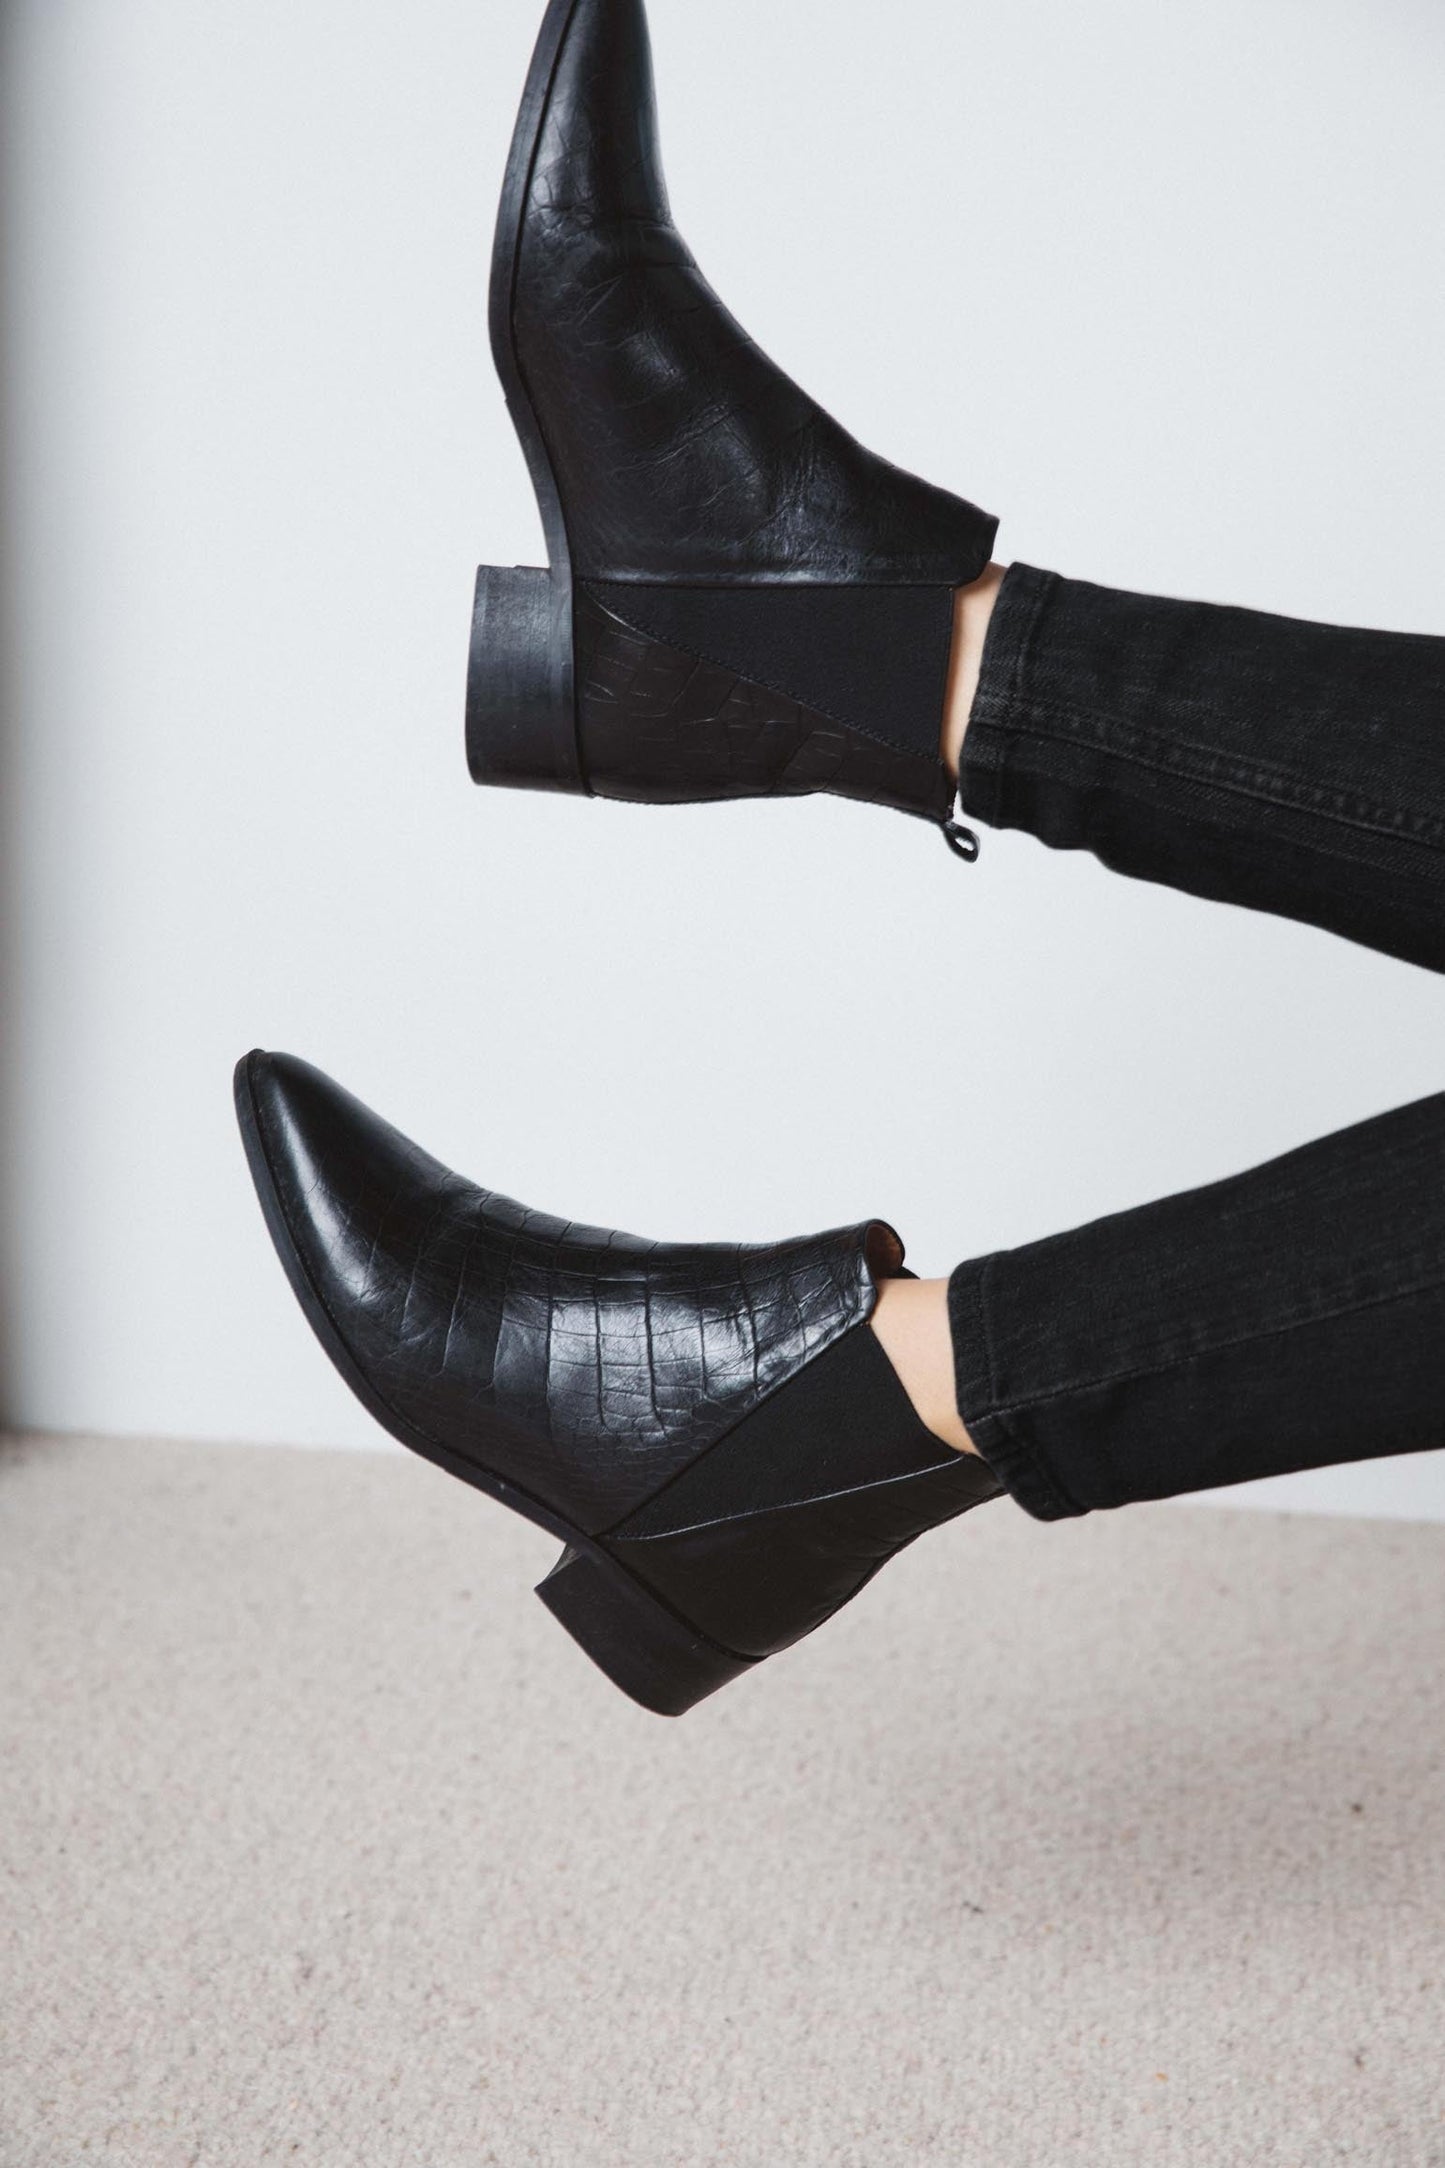 Michka ankle boots